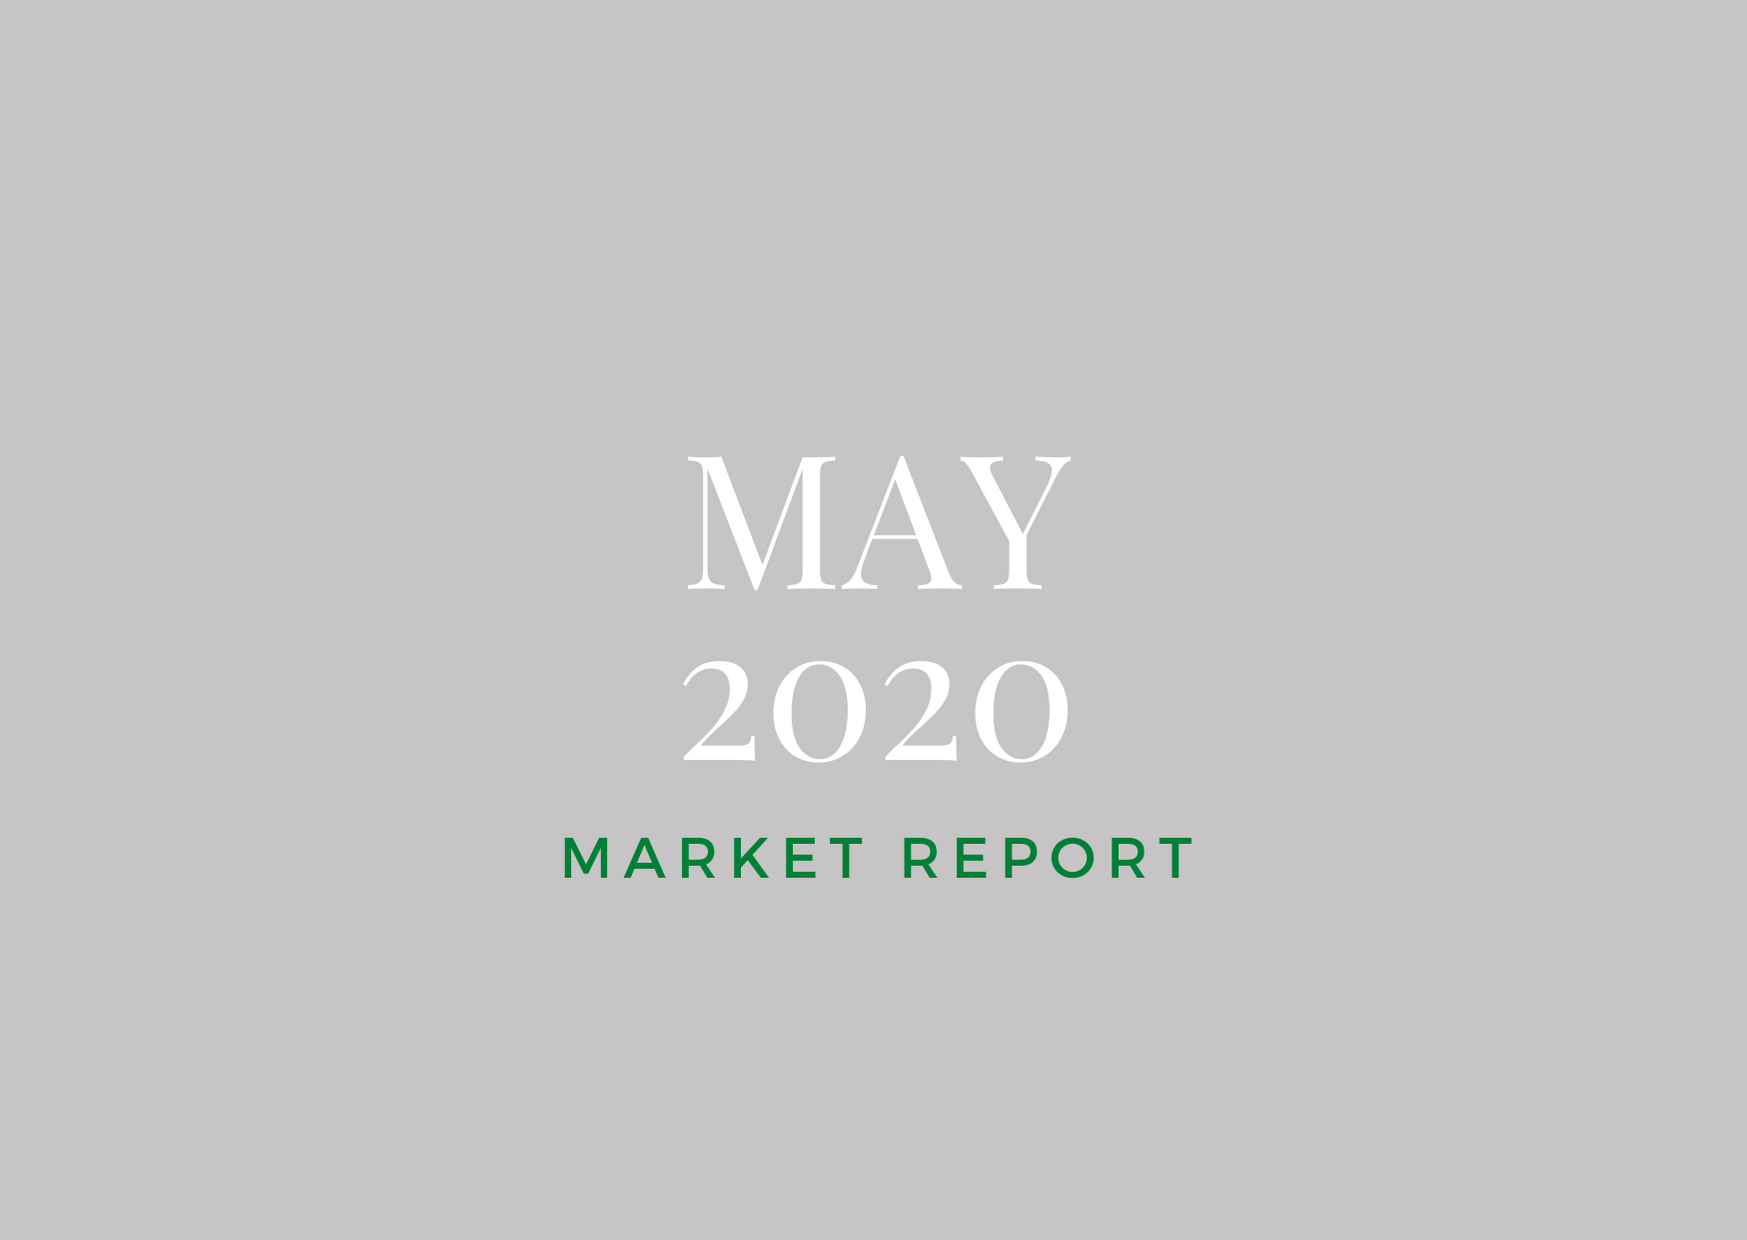 May 2020 Market Report